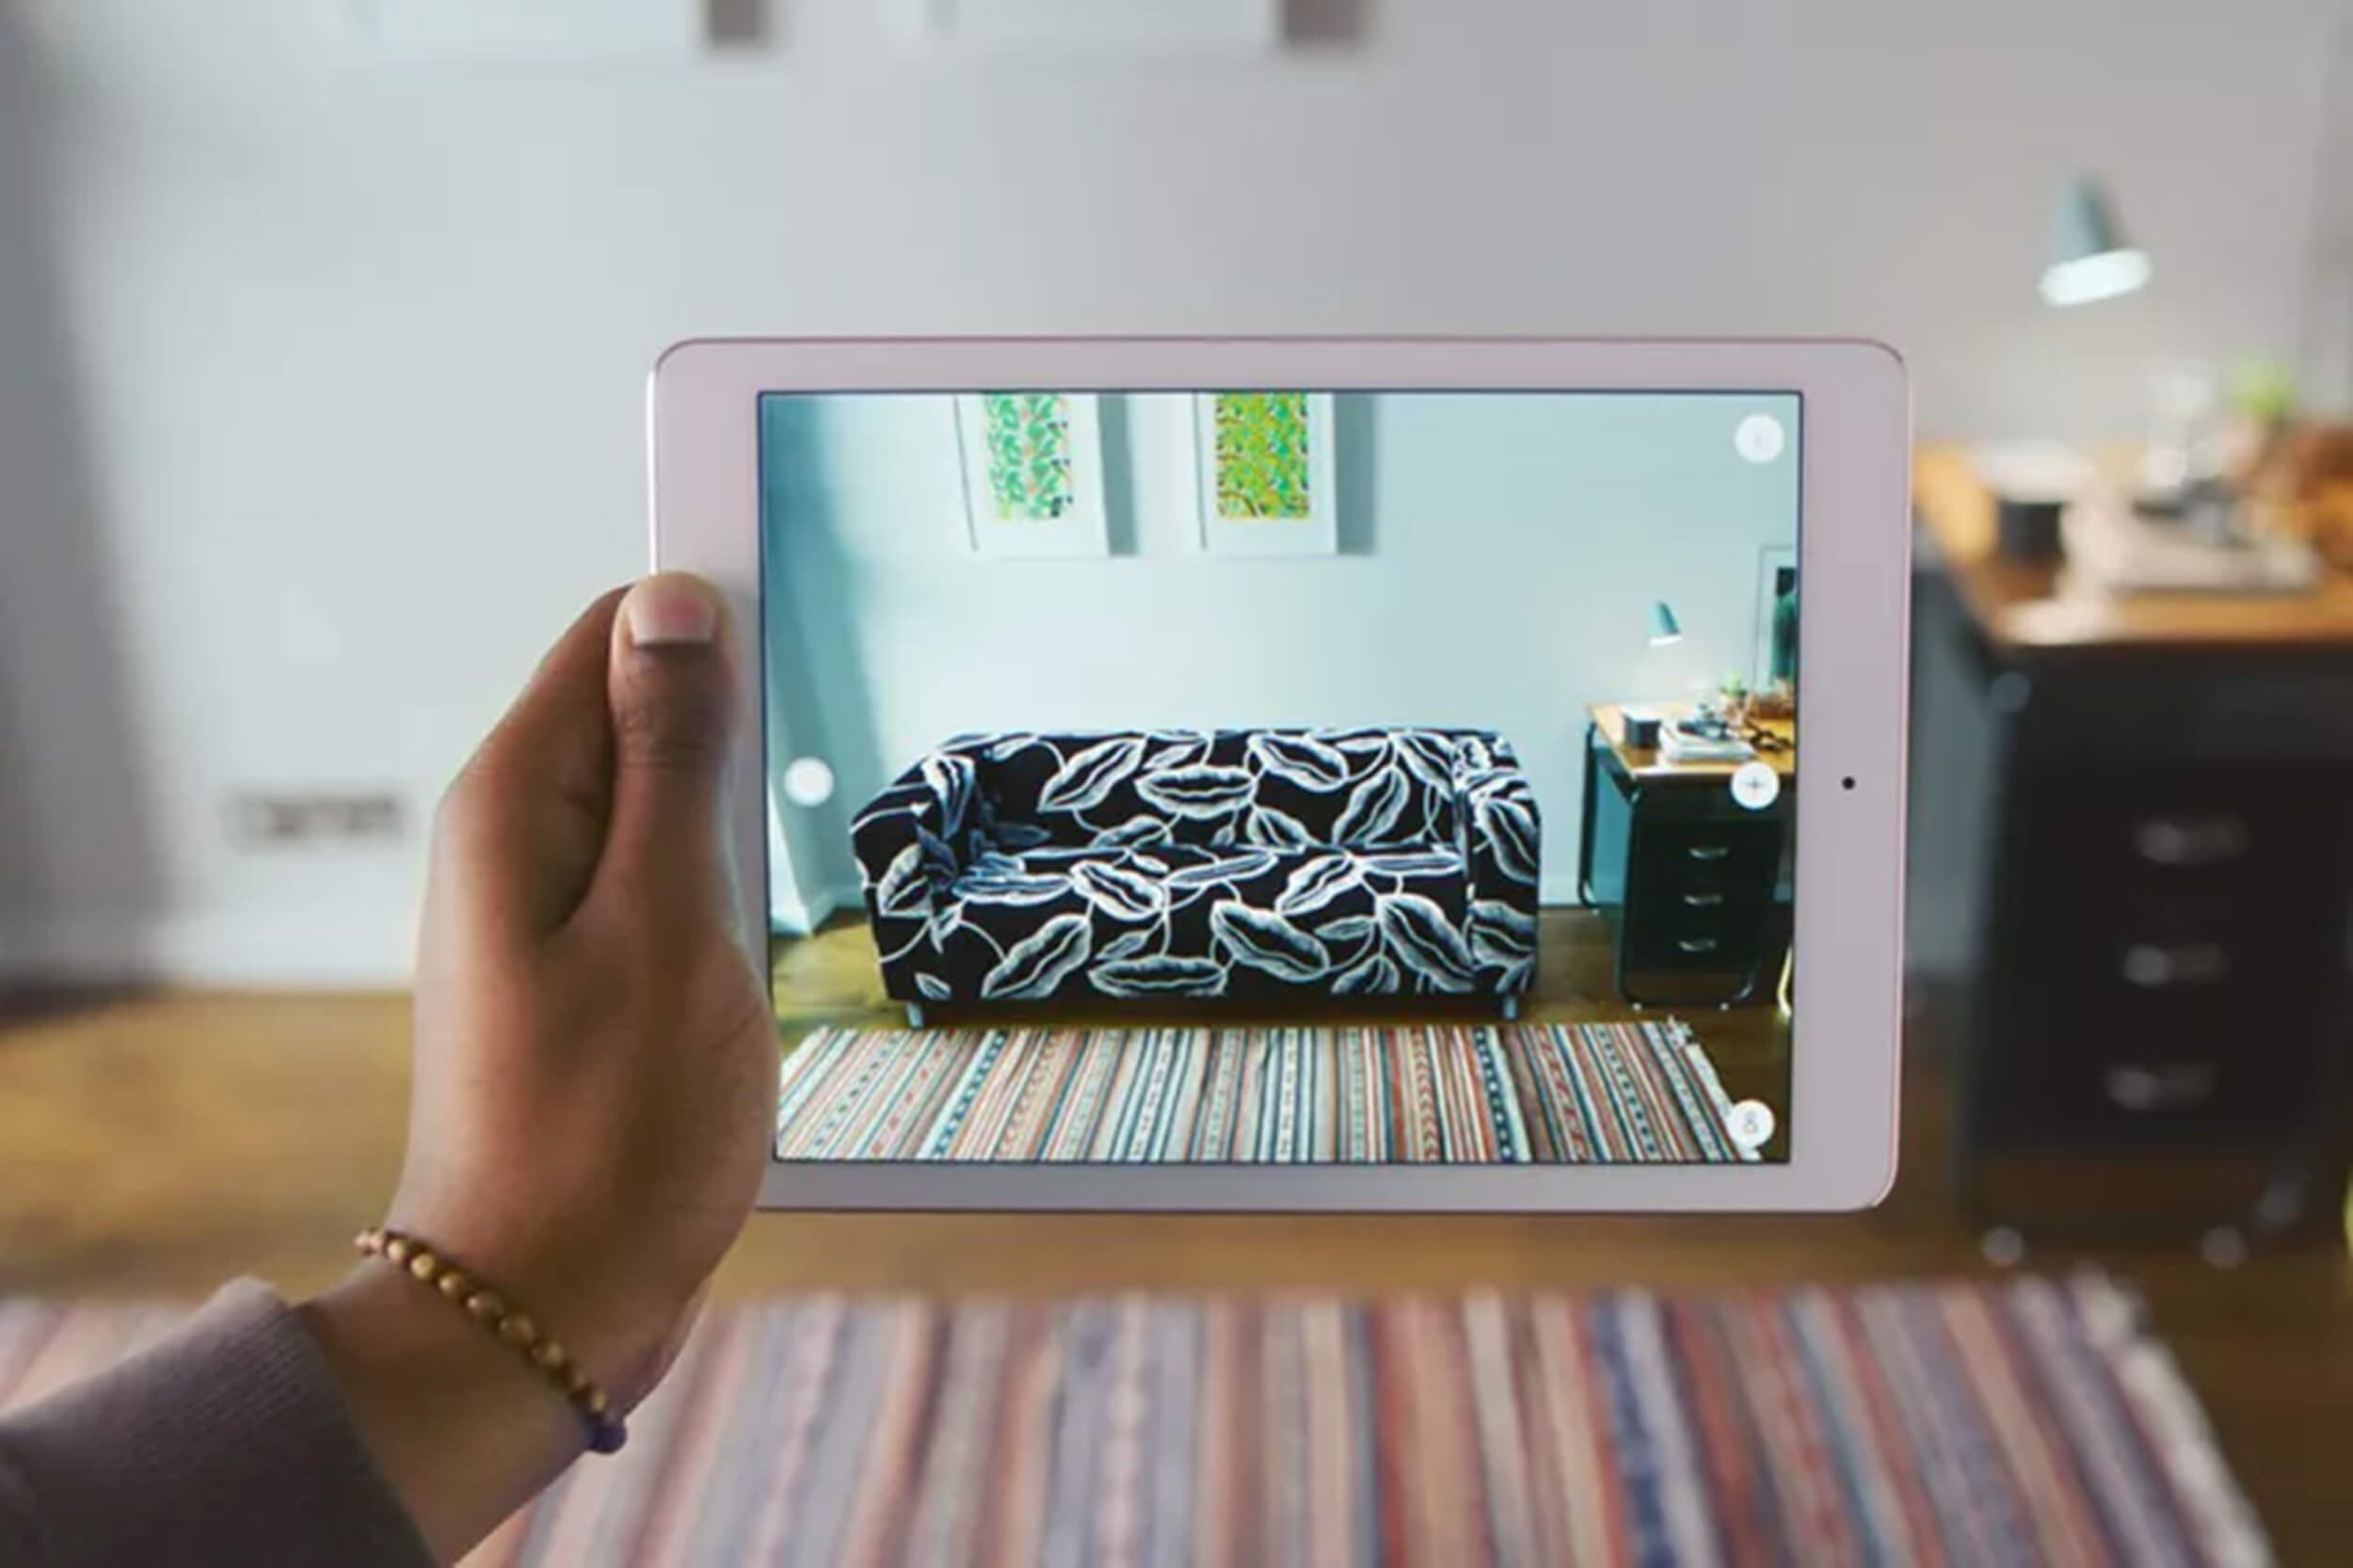 The IKEA AR experience helped remove the difficulty online shoppers faced when purchasing products